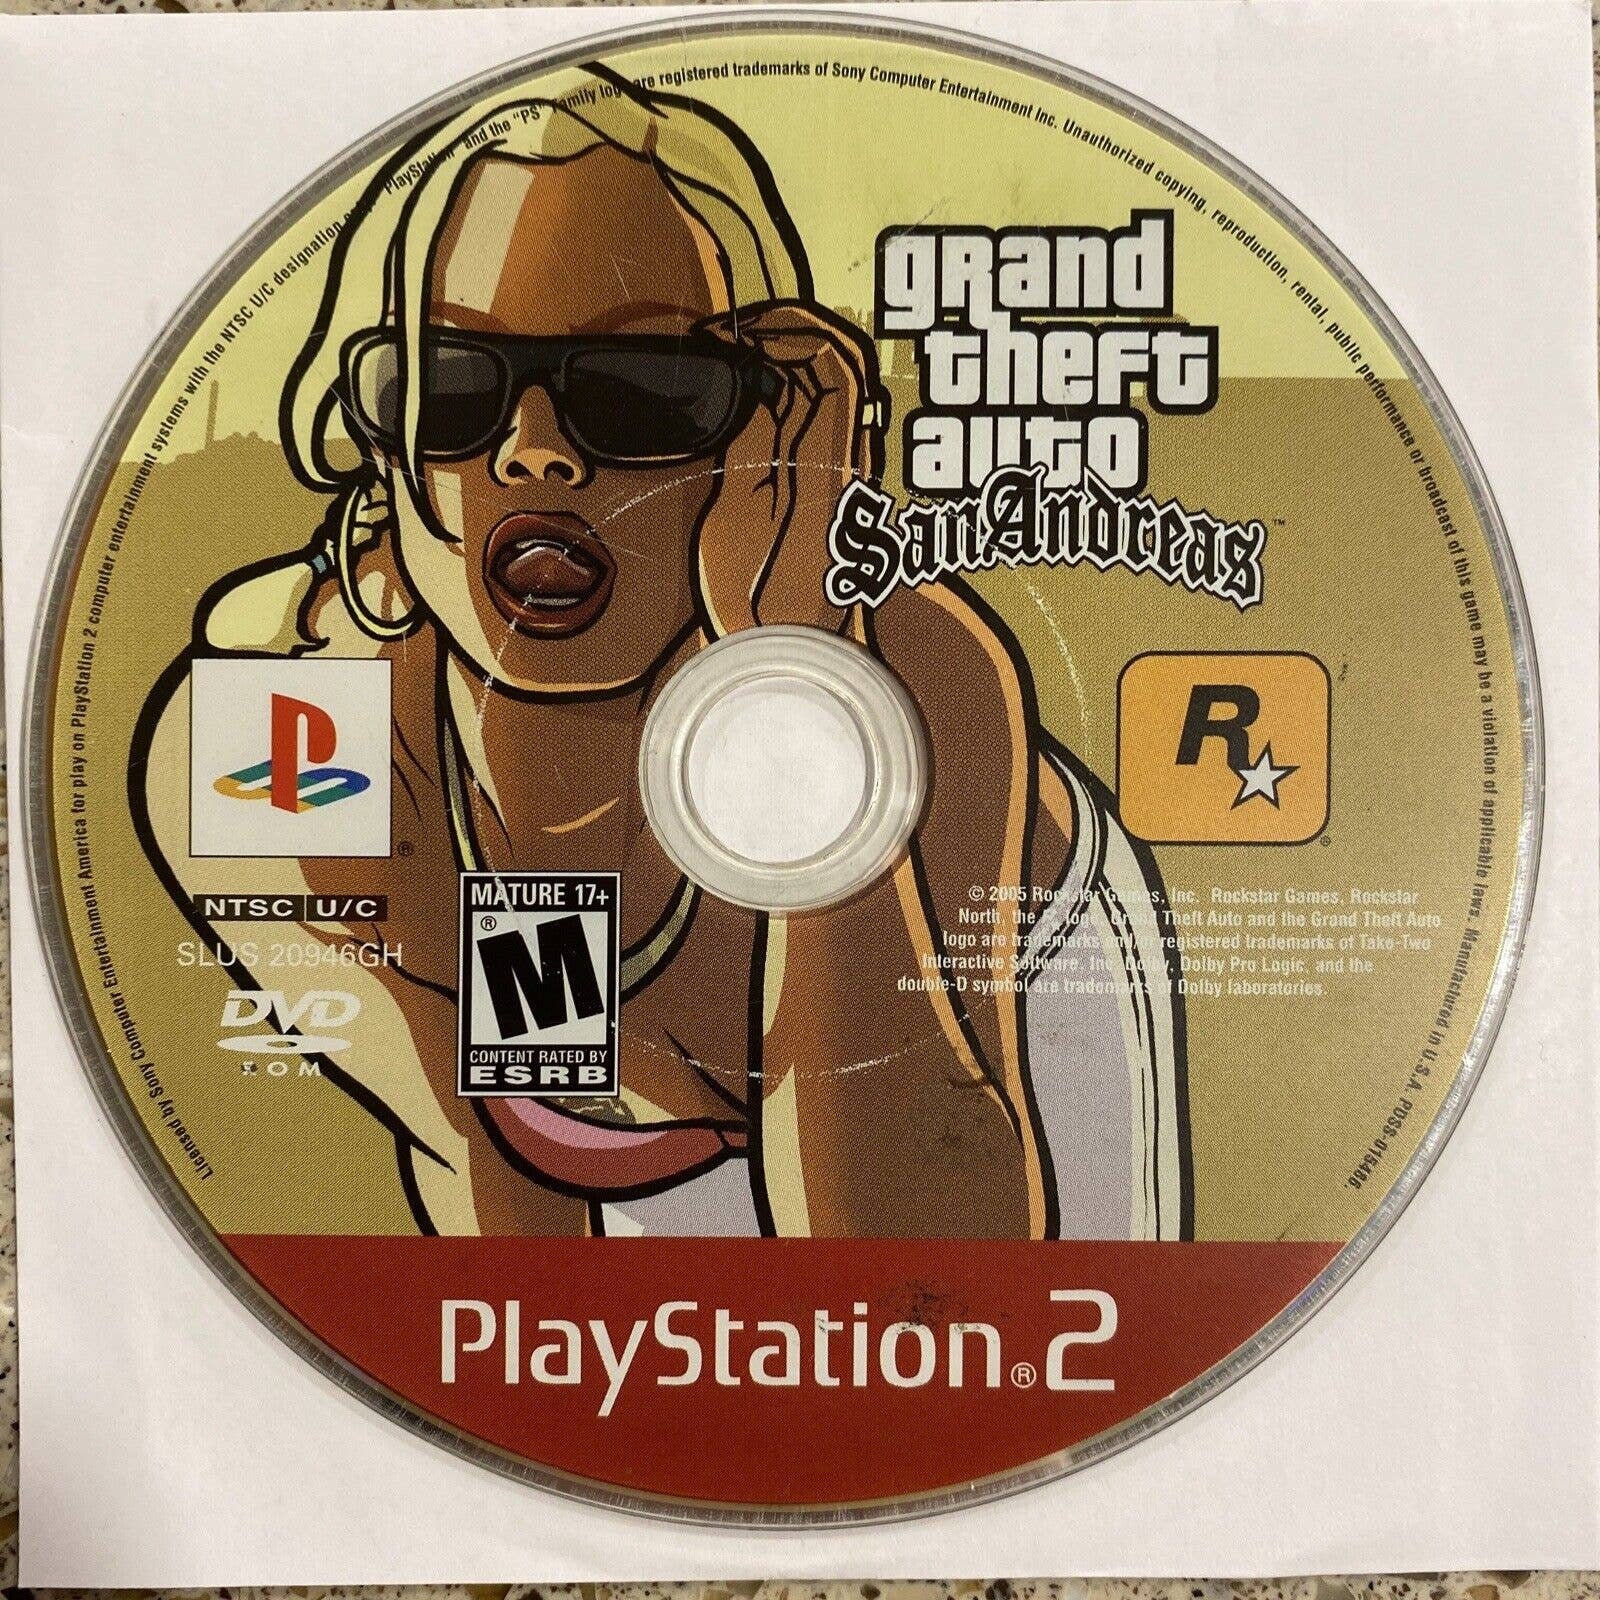 PS2 Grand Theft Auto V (Mods GTA San Andreas) DVD game Playstation 2